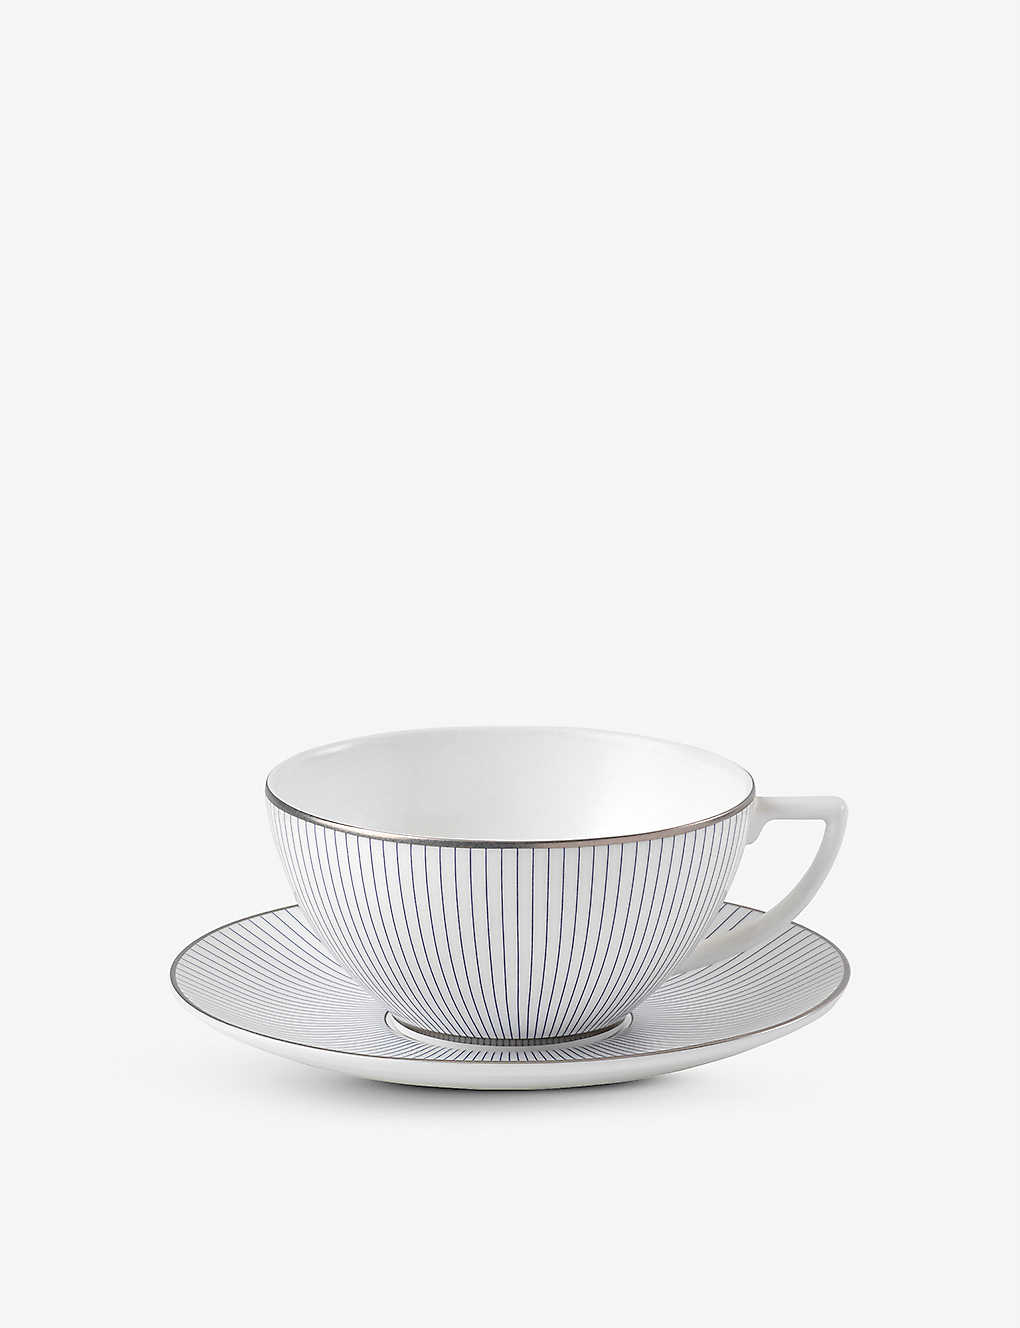 Wedgwood Pinstripe Porcelain Teacup And Saucer Set Of Two